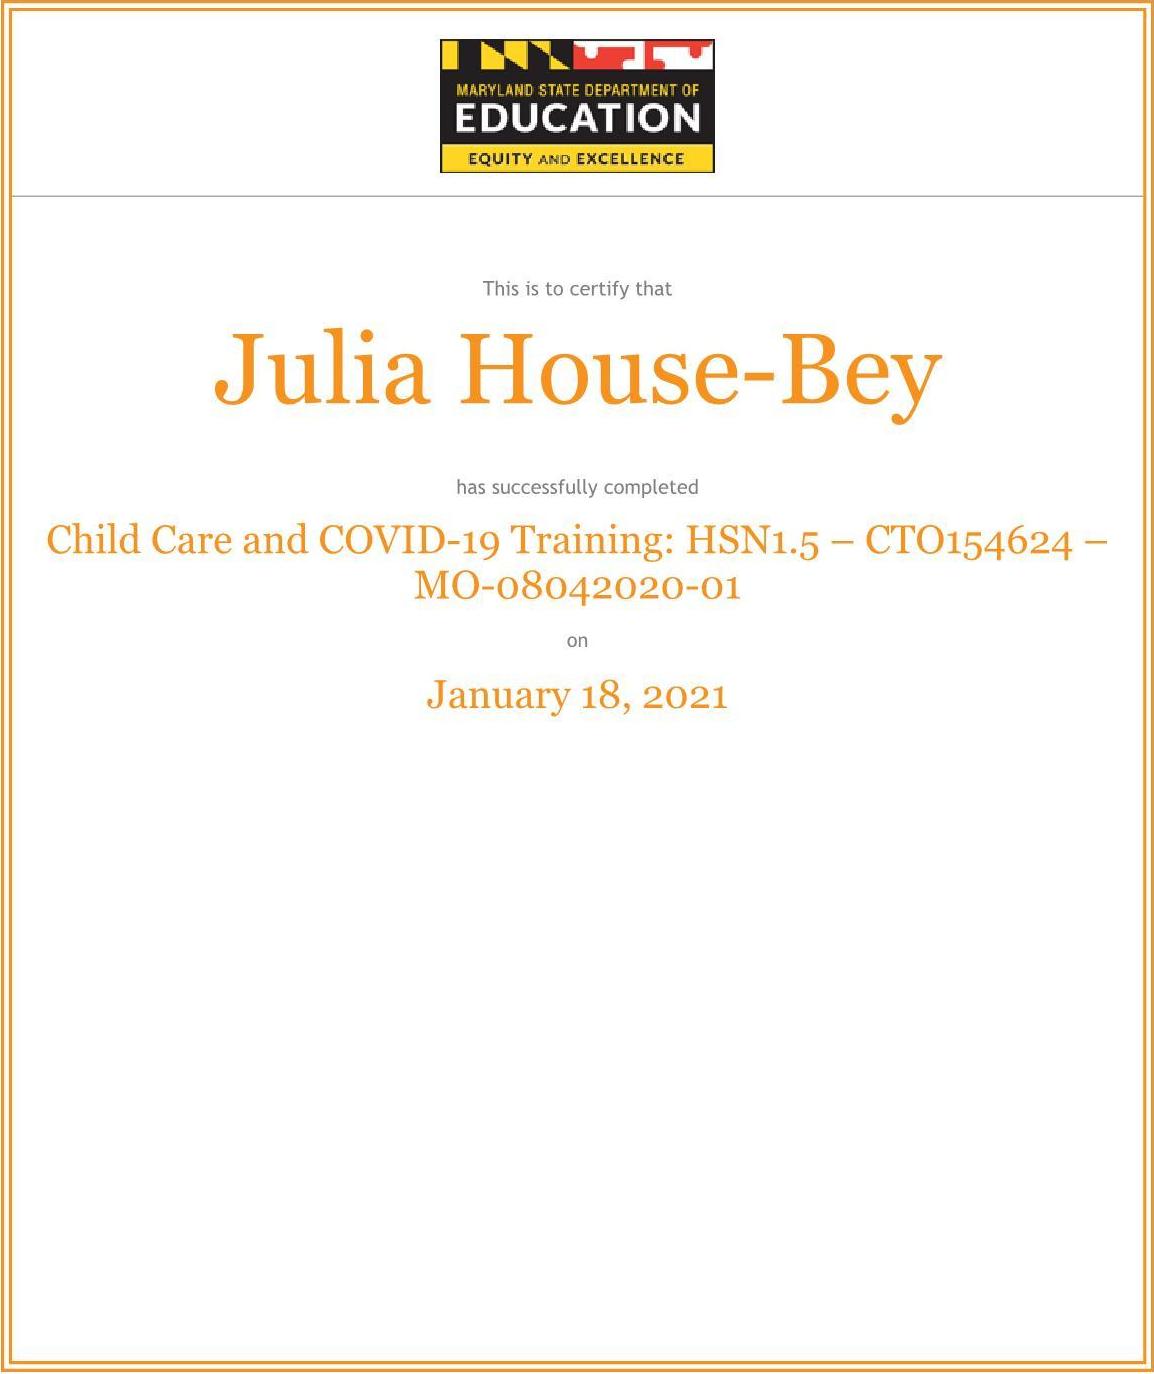 Child Care and Covid-19 Training